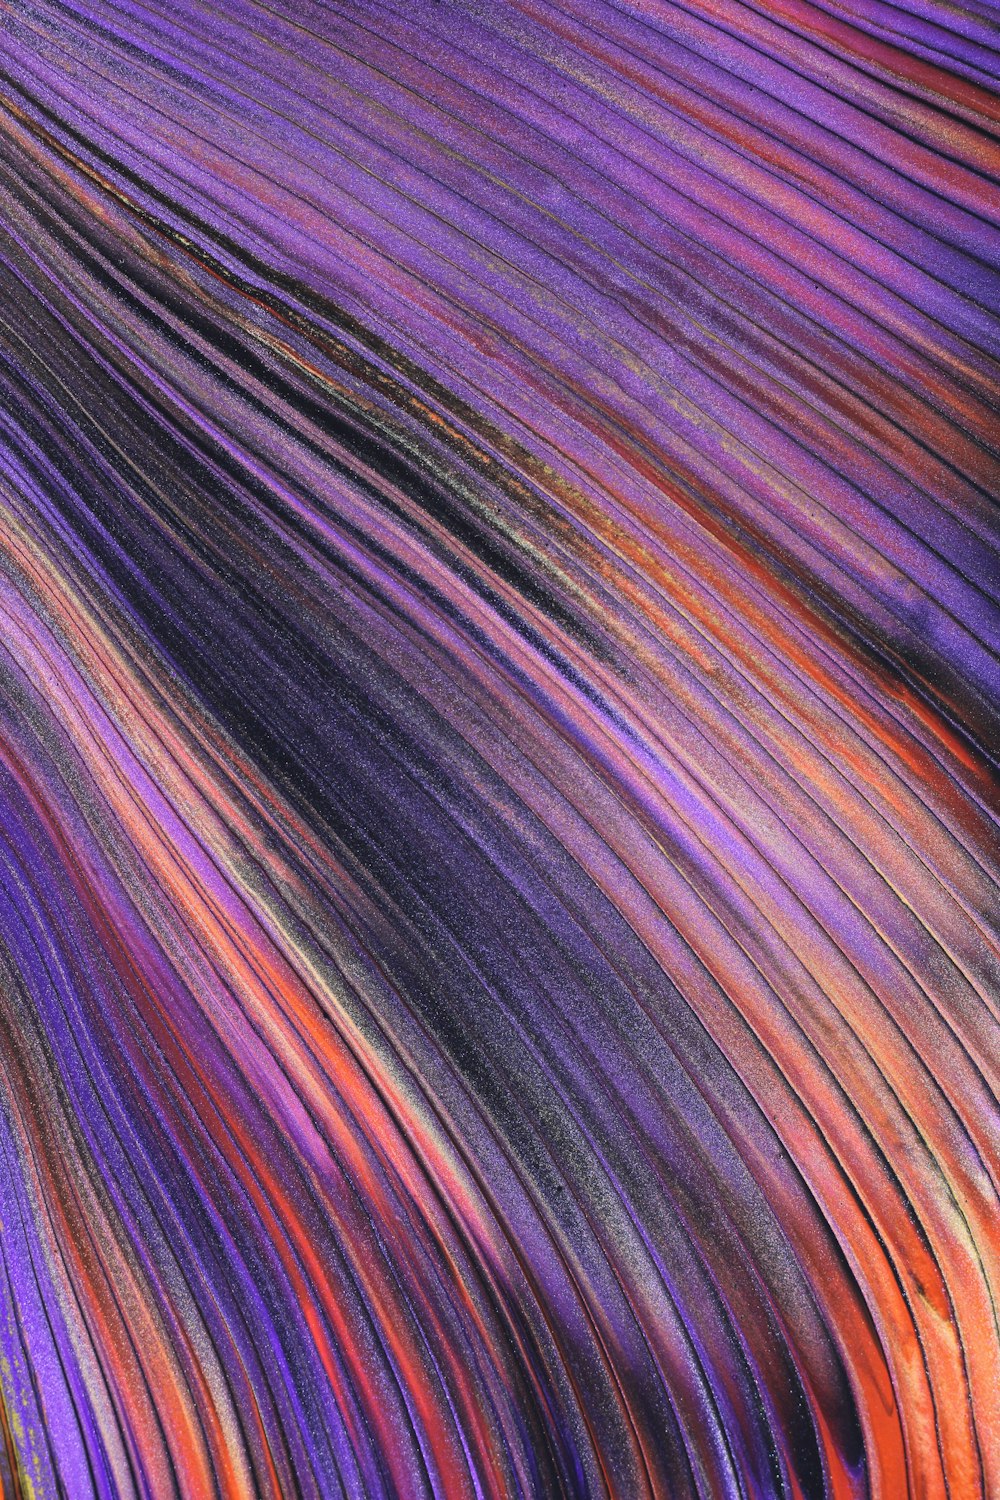 a close up of a purple and orange striped material